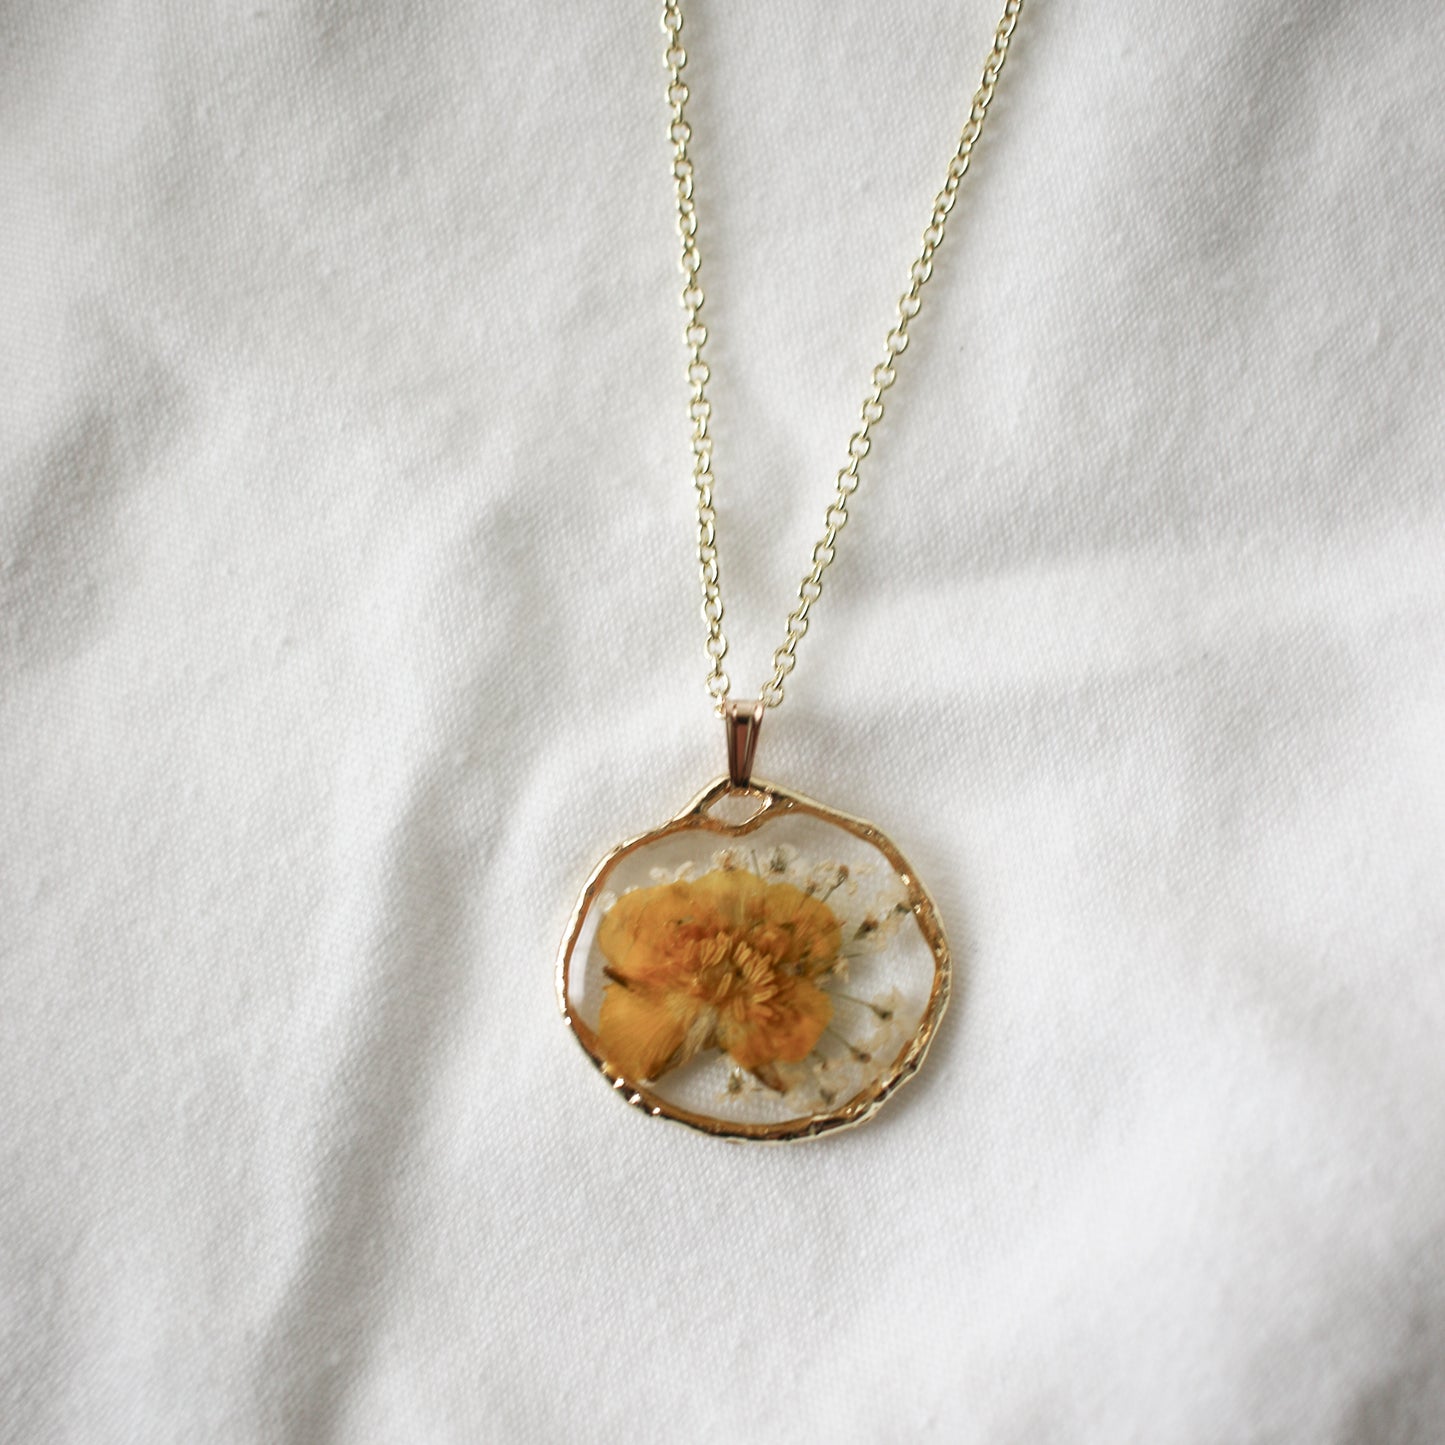 The Trouvaille Buttercup Necklace